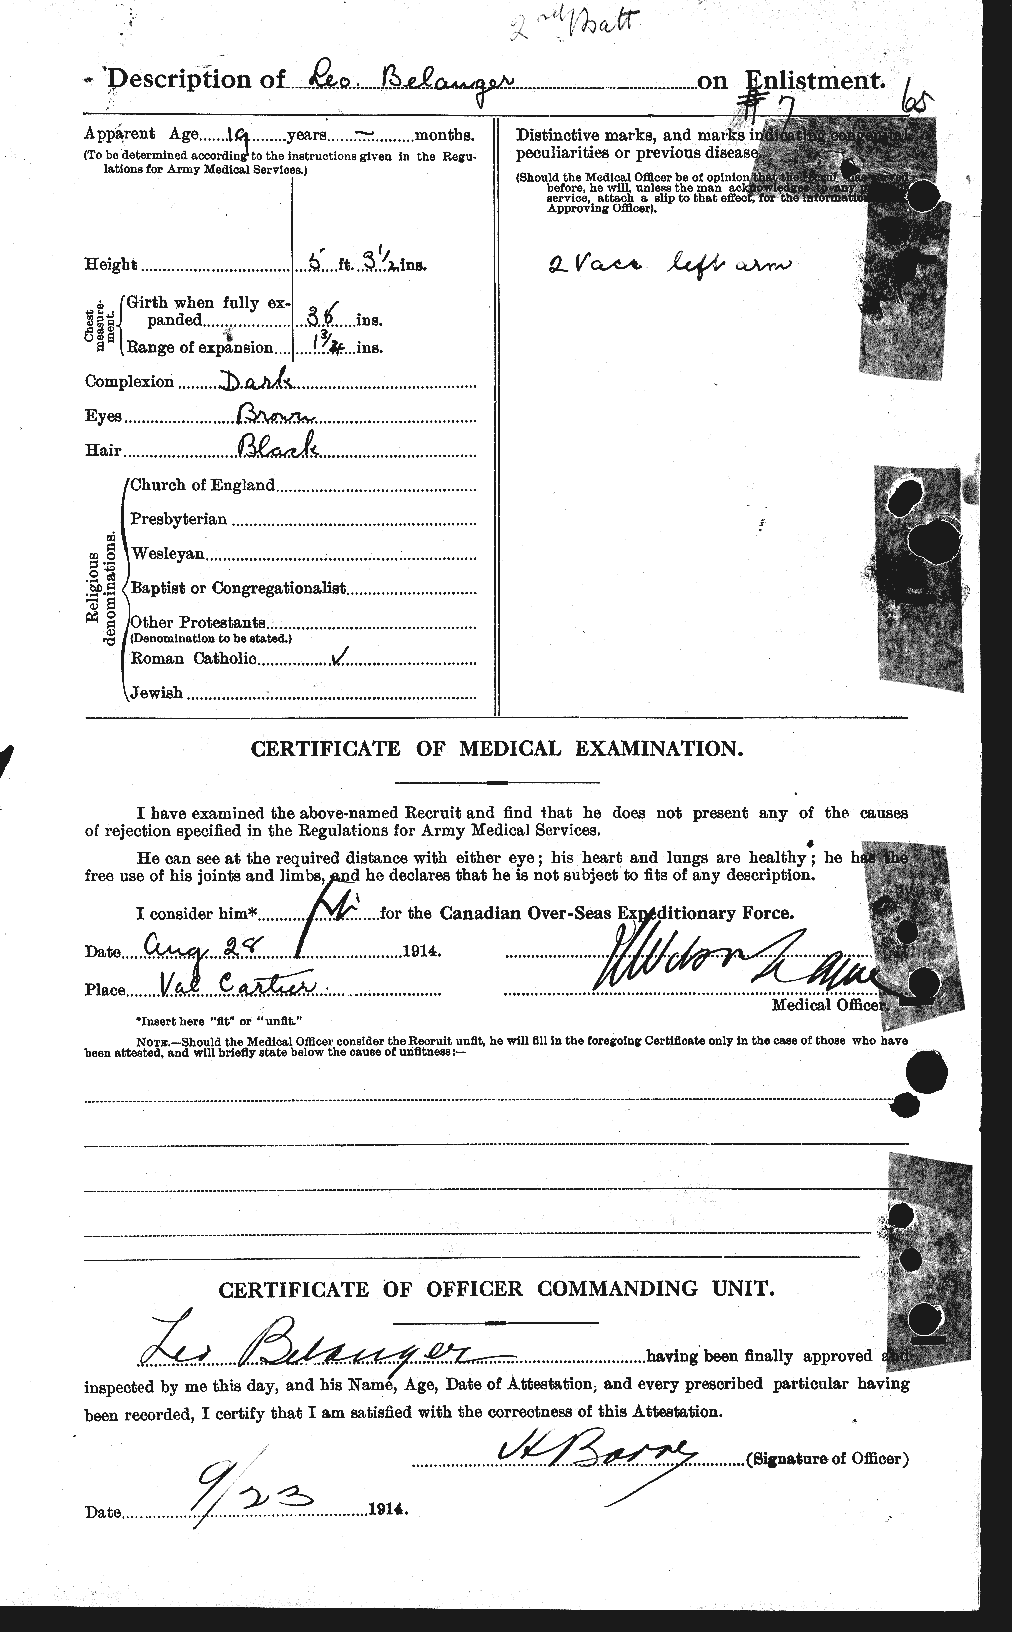 Personnel Records of the First World War - CEF 232701b